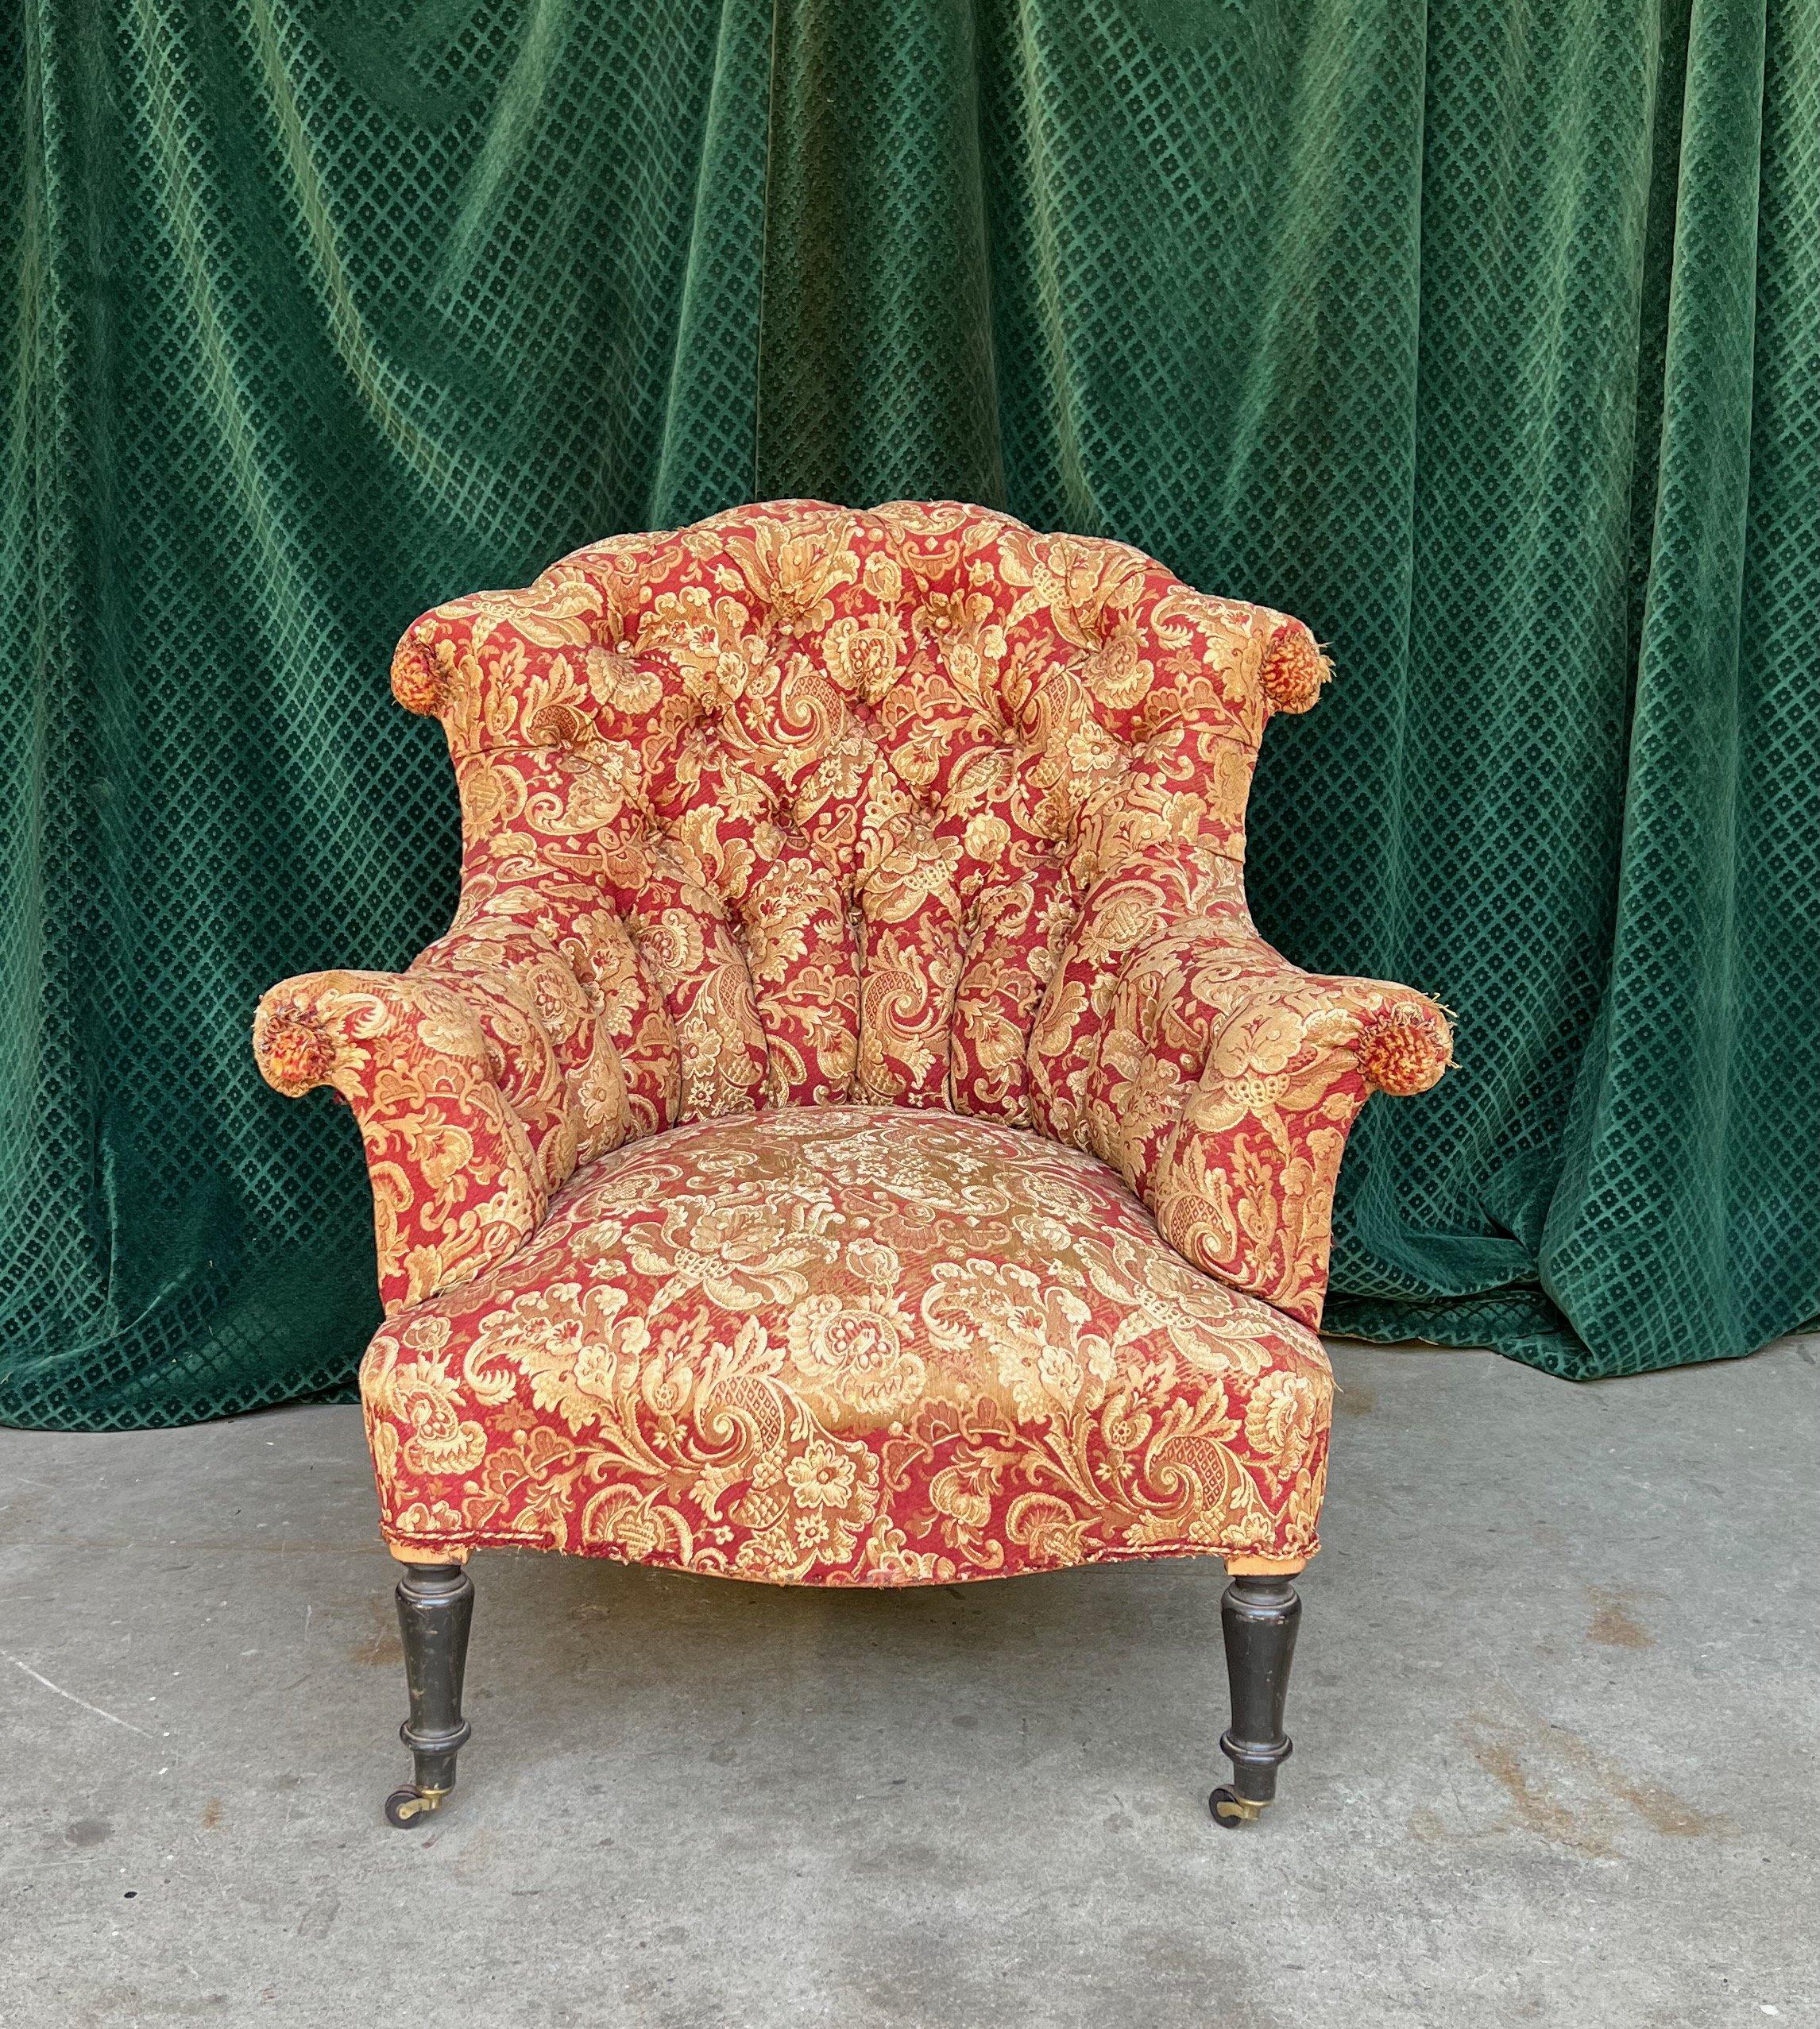 Upholstery Pair of Tufted and Scrolled Back Chairs in Printed Velvet